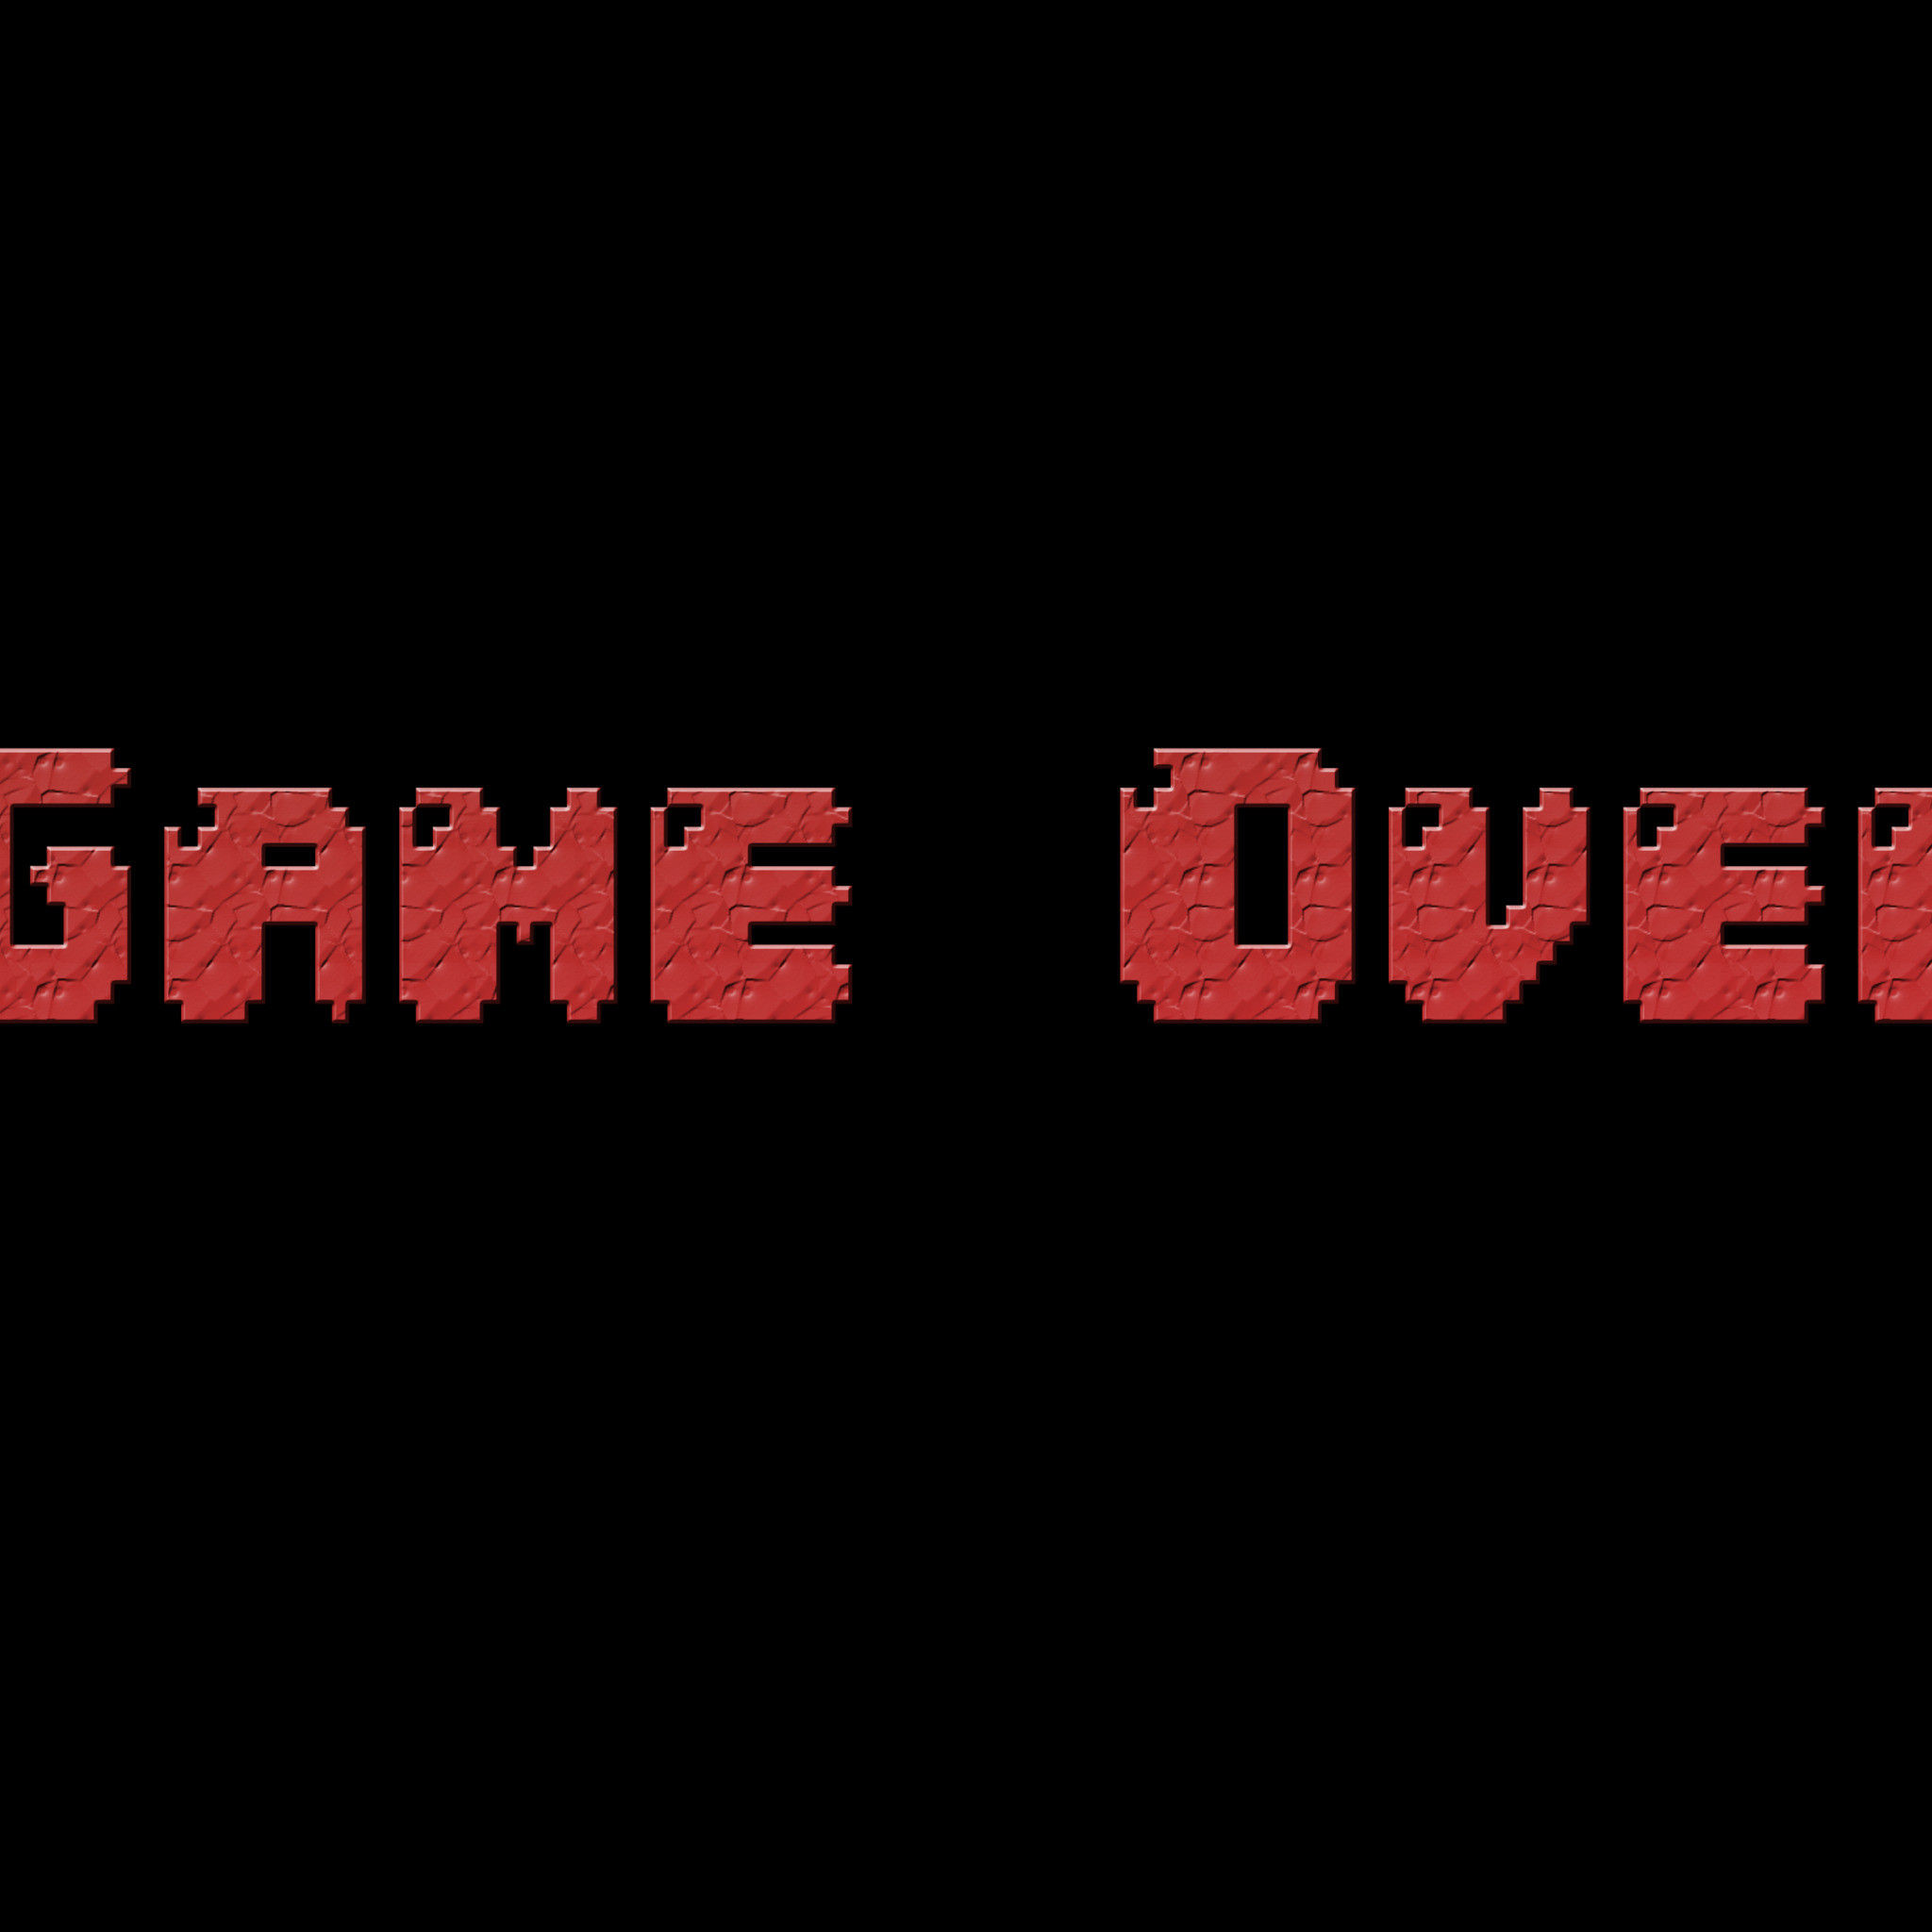 2048x2048 Game Over Typography (Ipad Air)